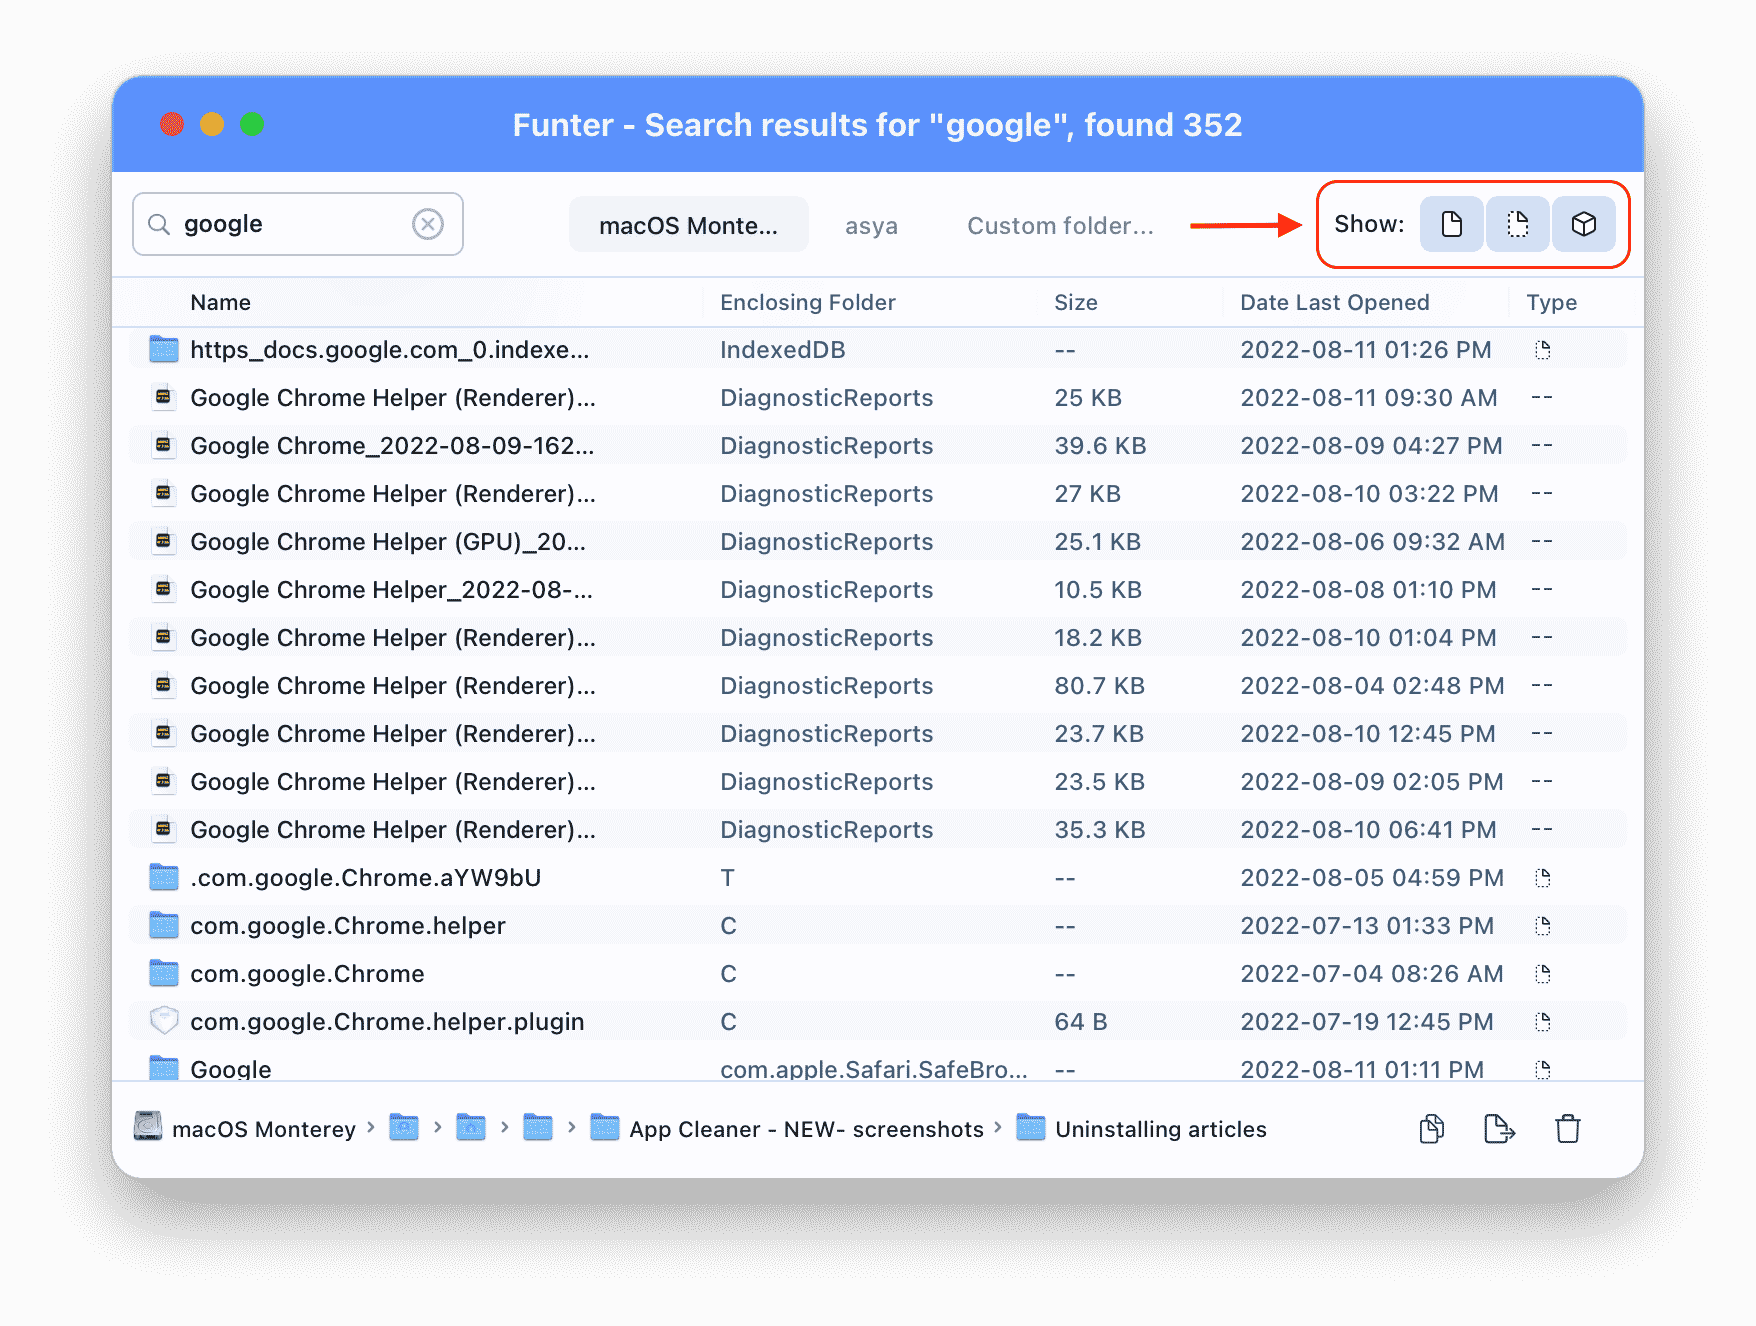 funter app - search results for hidden png files